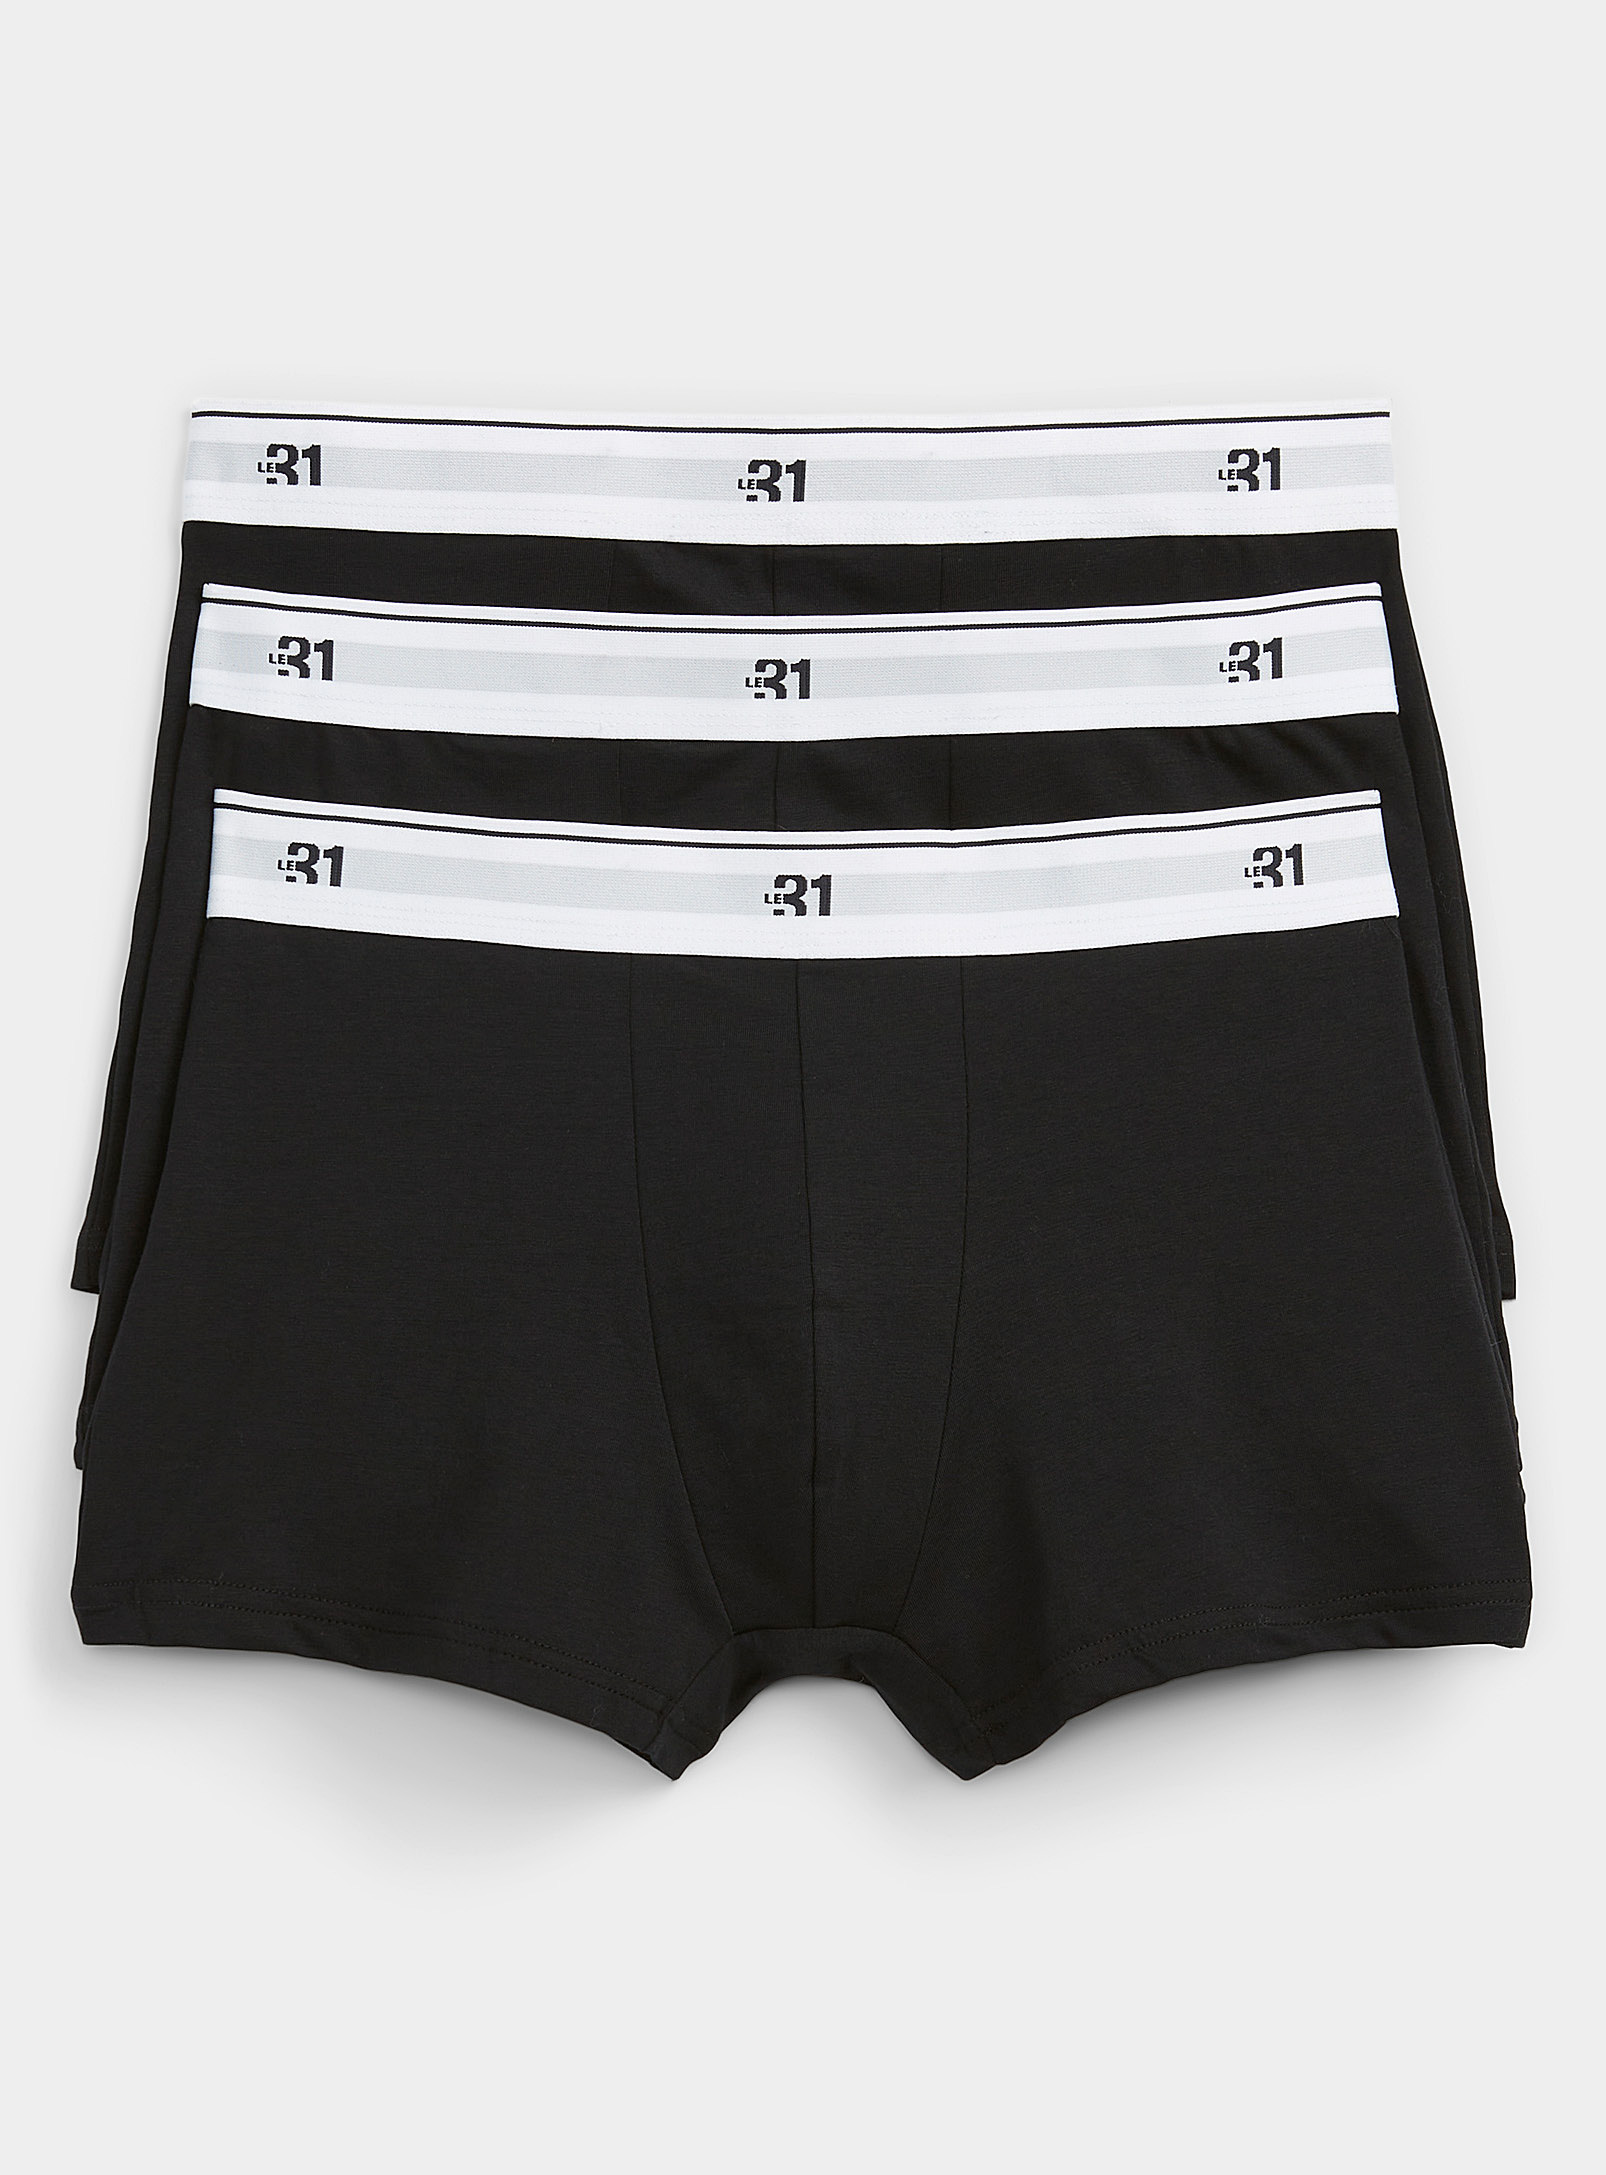 Le 31 Organic Cotton Trunks 3-pack In Black